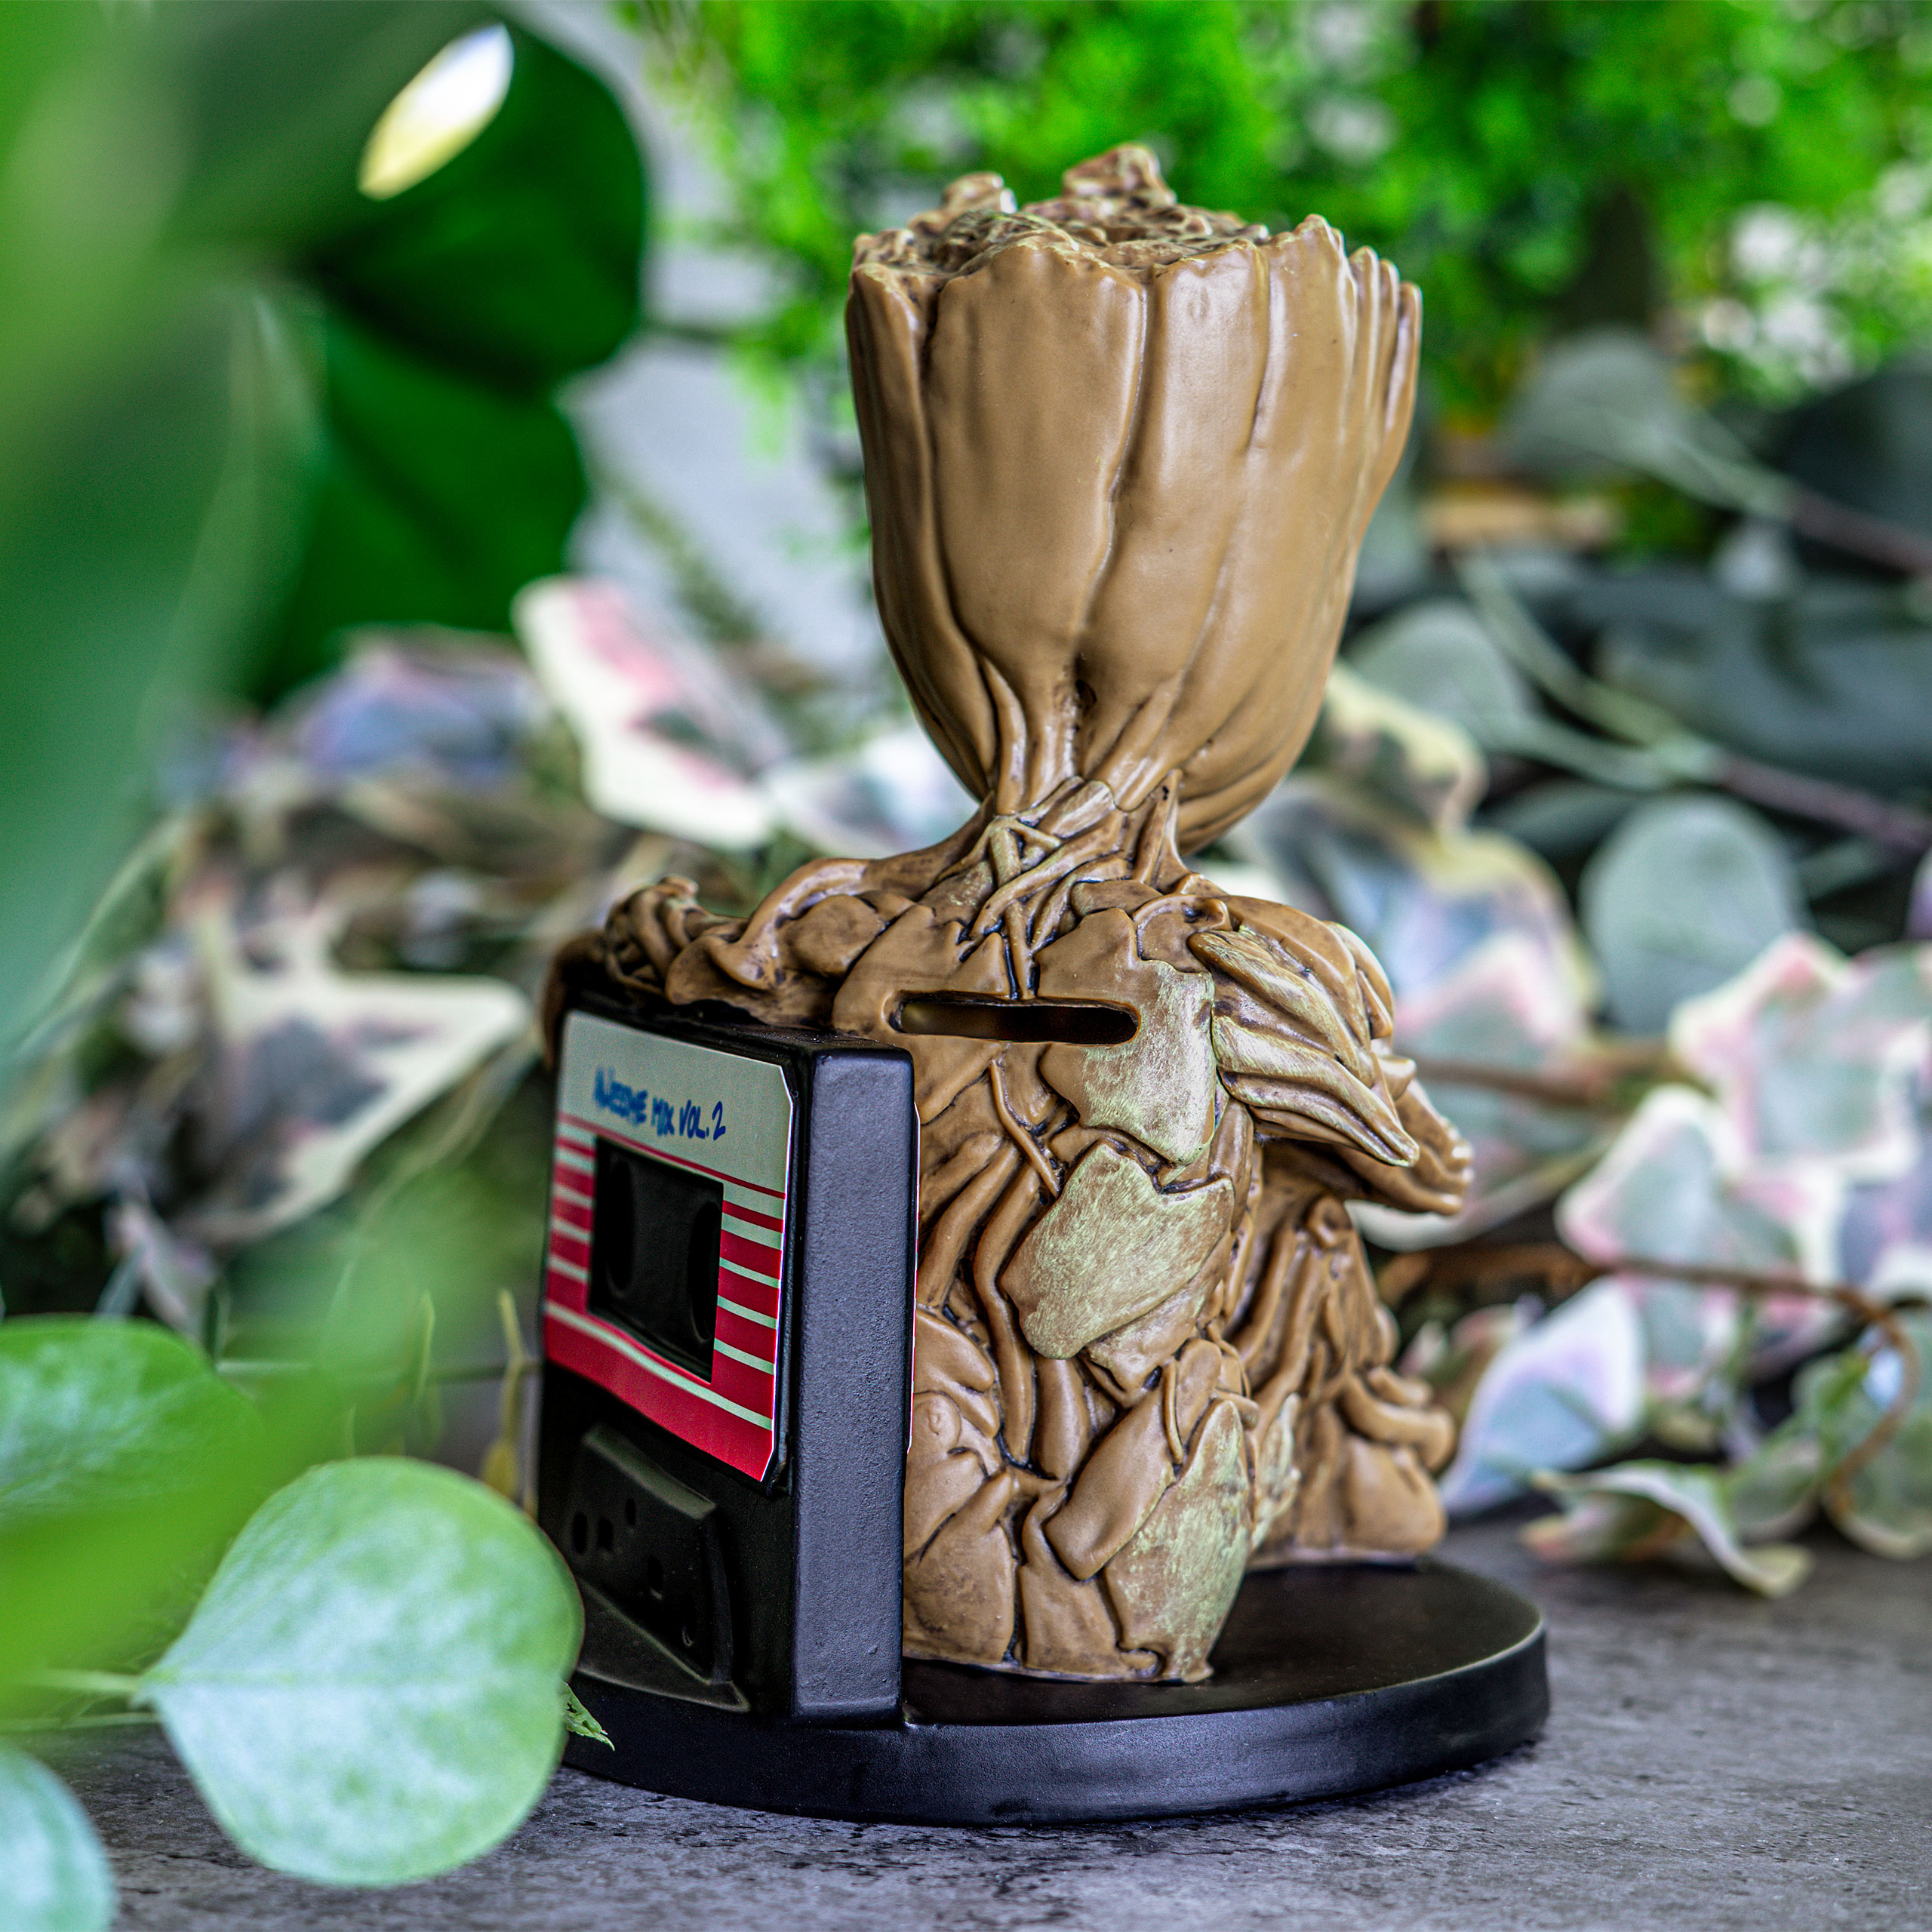 Guardians of the Galaxy - Baby Groot with Tape Money Box